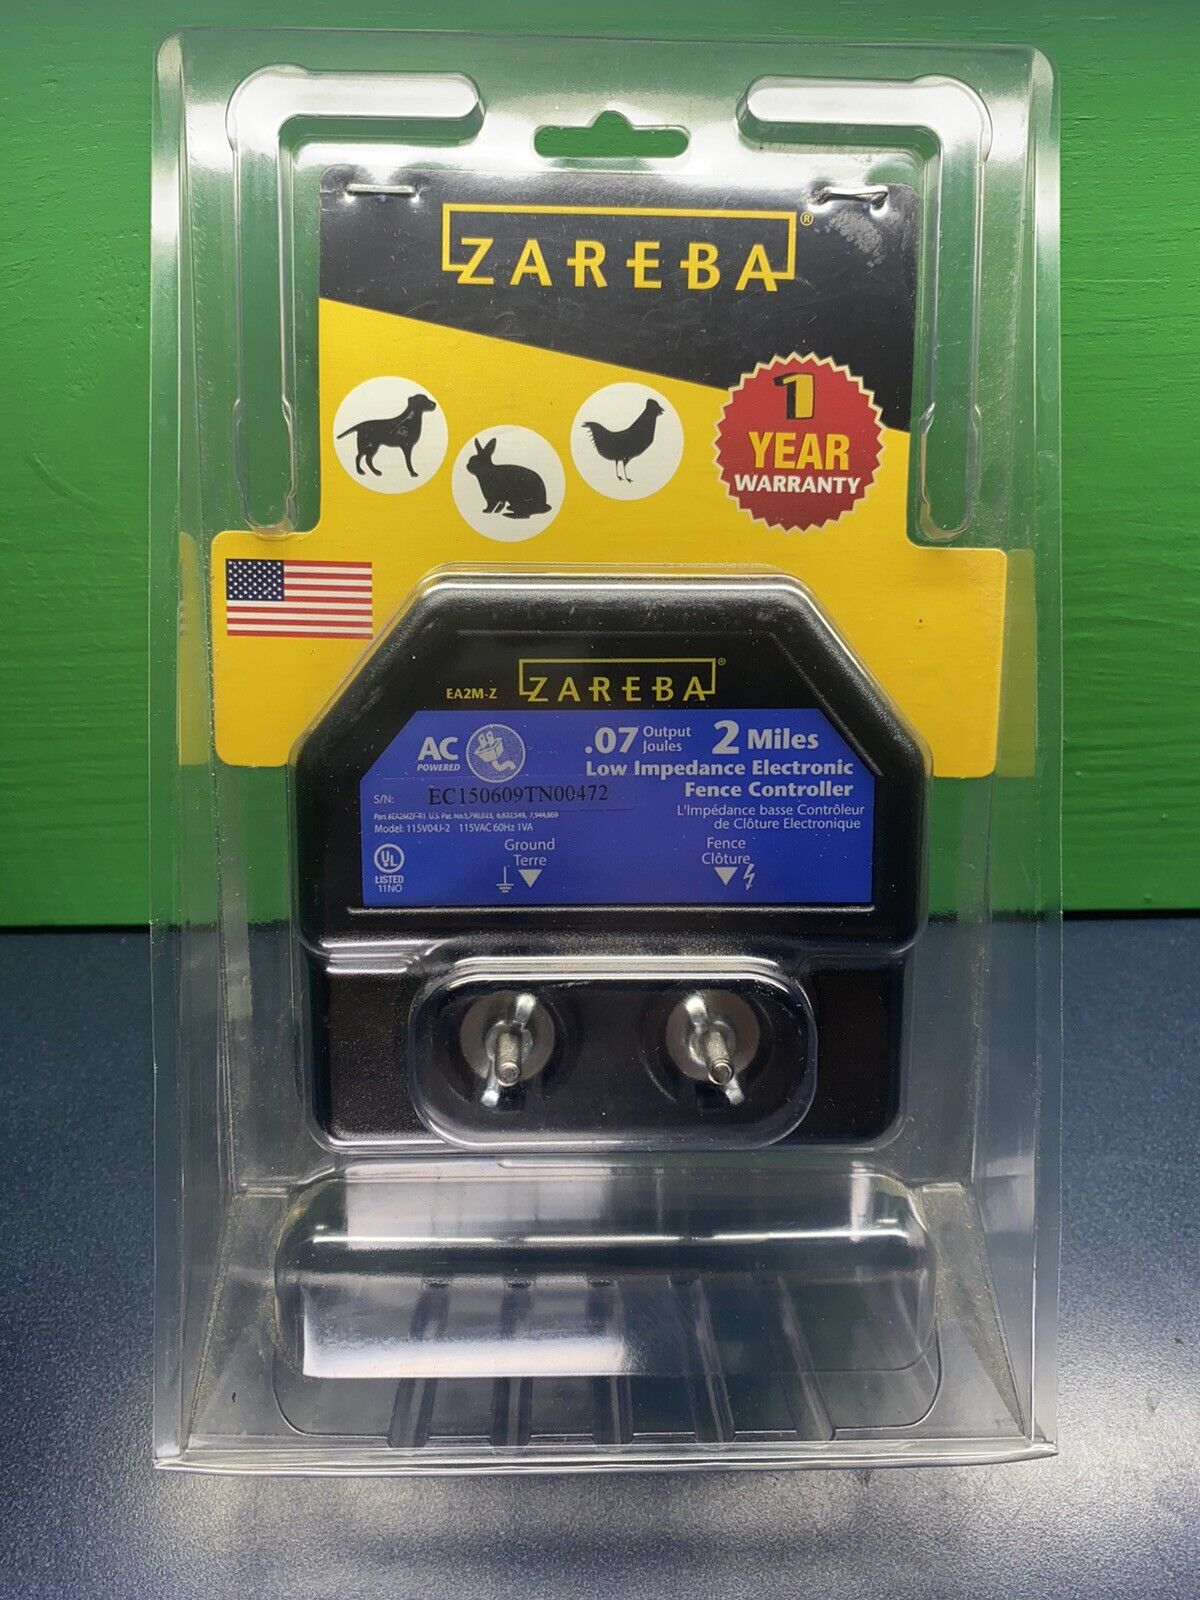 ZAREBA 2 Miles Low Impedance Electric Fence Controller - BRAND NEW, Never Opened